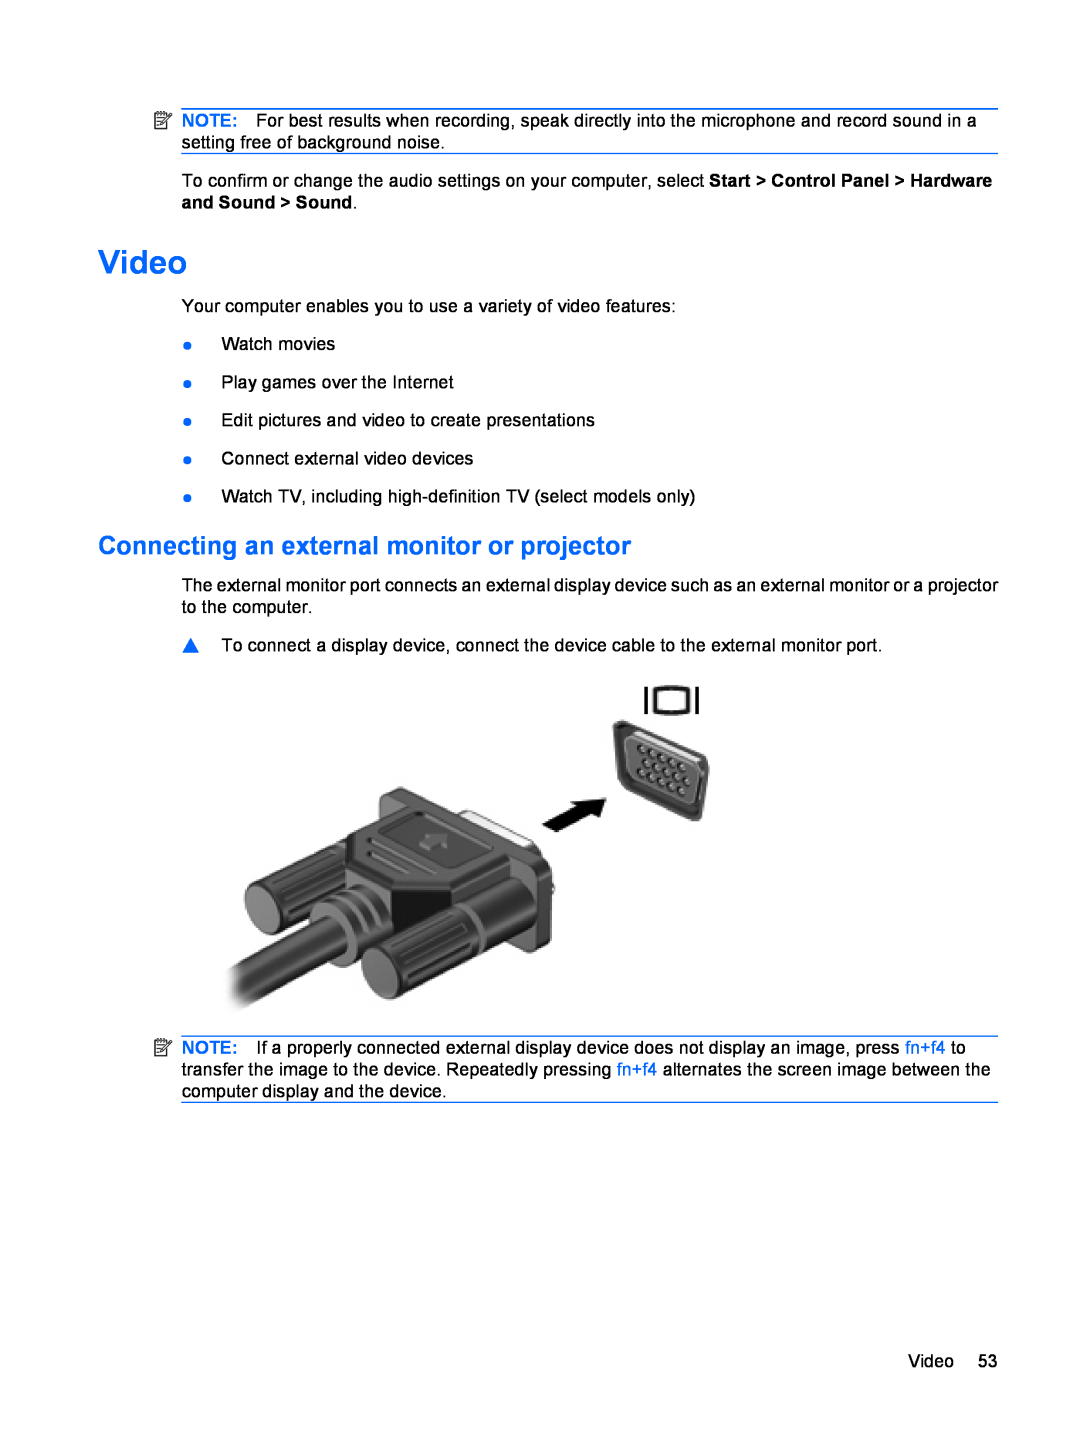 HP dv4-2160us manual Video, Connecting an external monitor or projector 